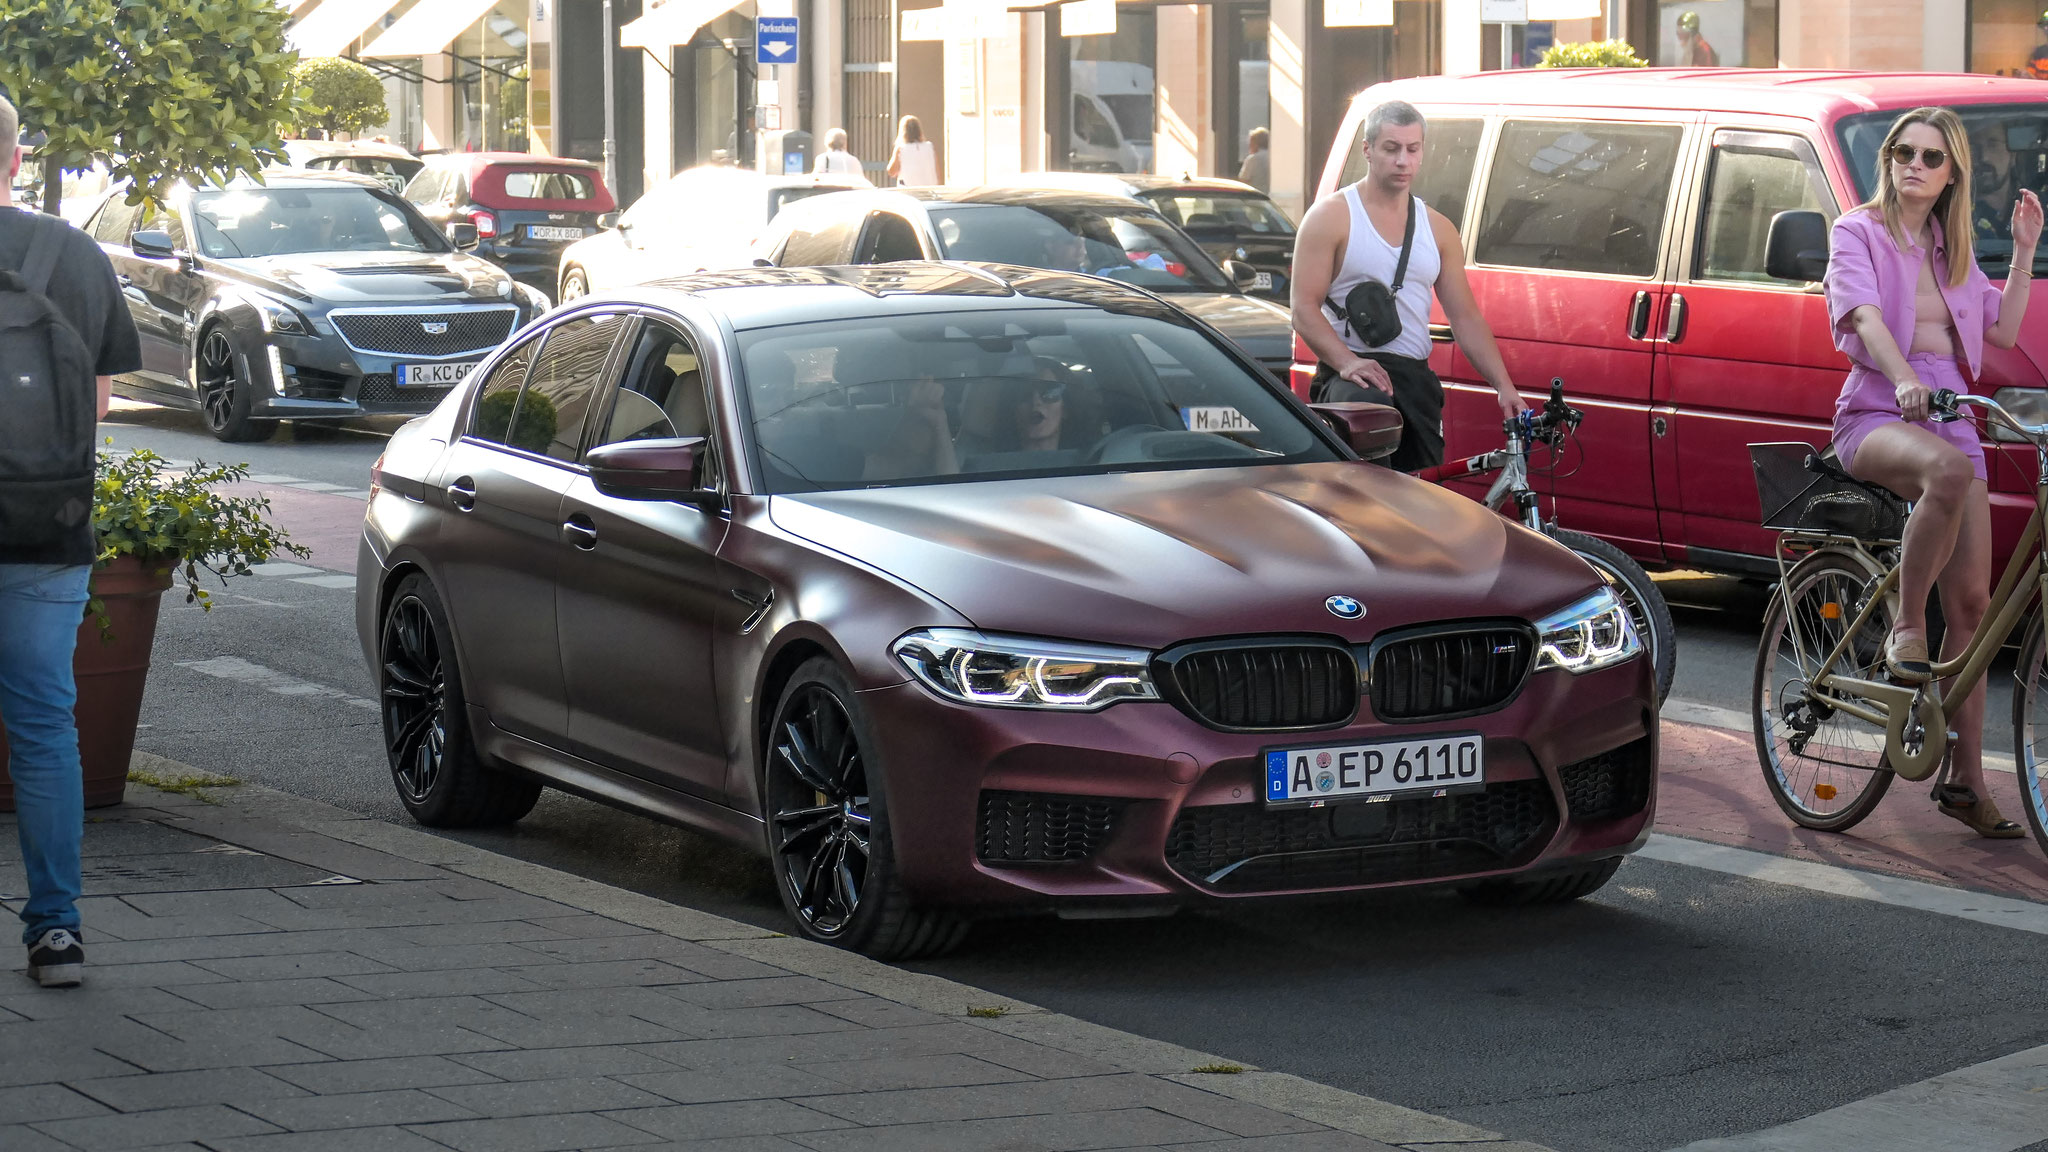 BMW M5 First Edition (1 of 400) - A-EP-6110